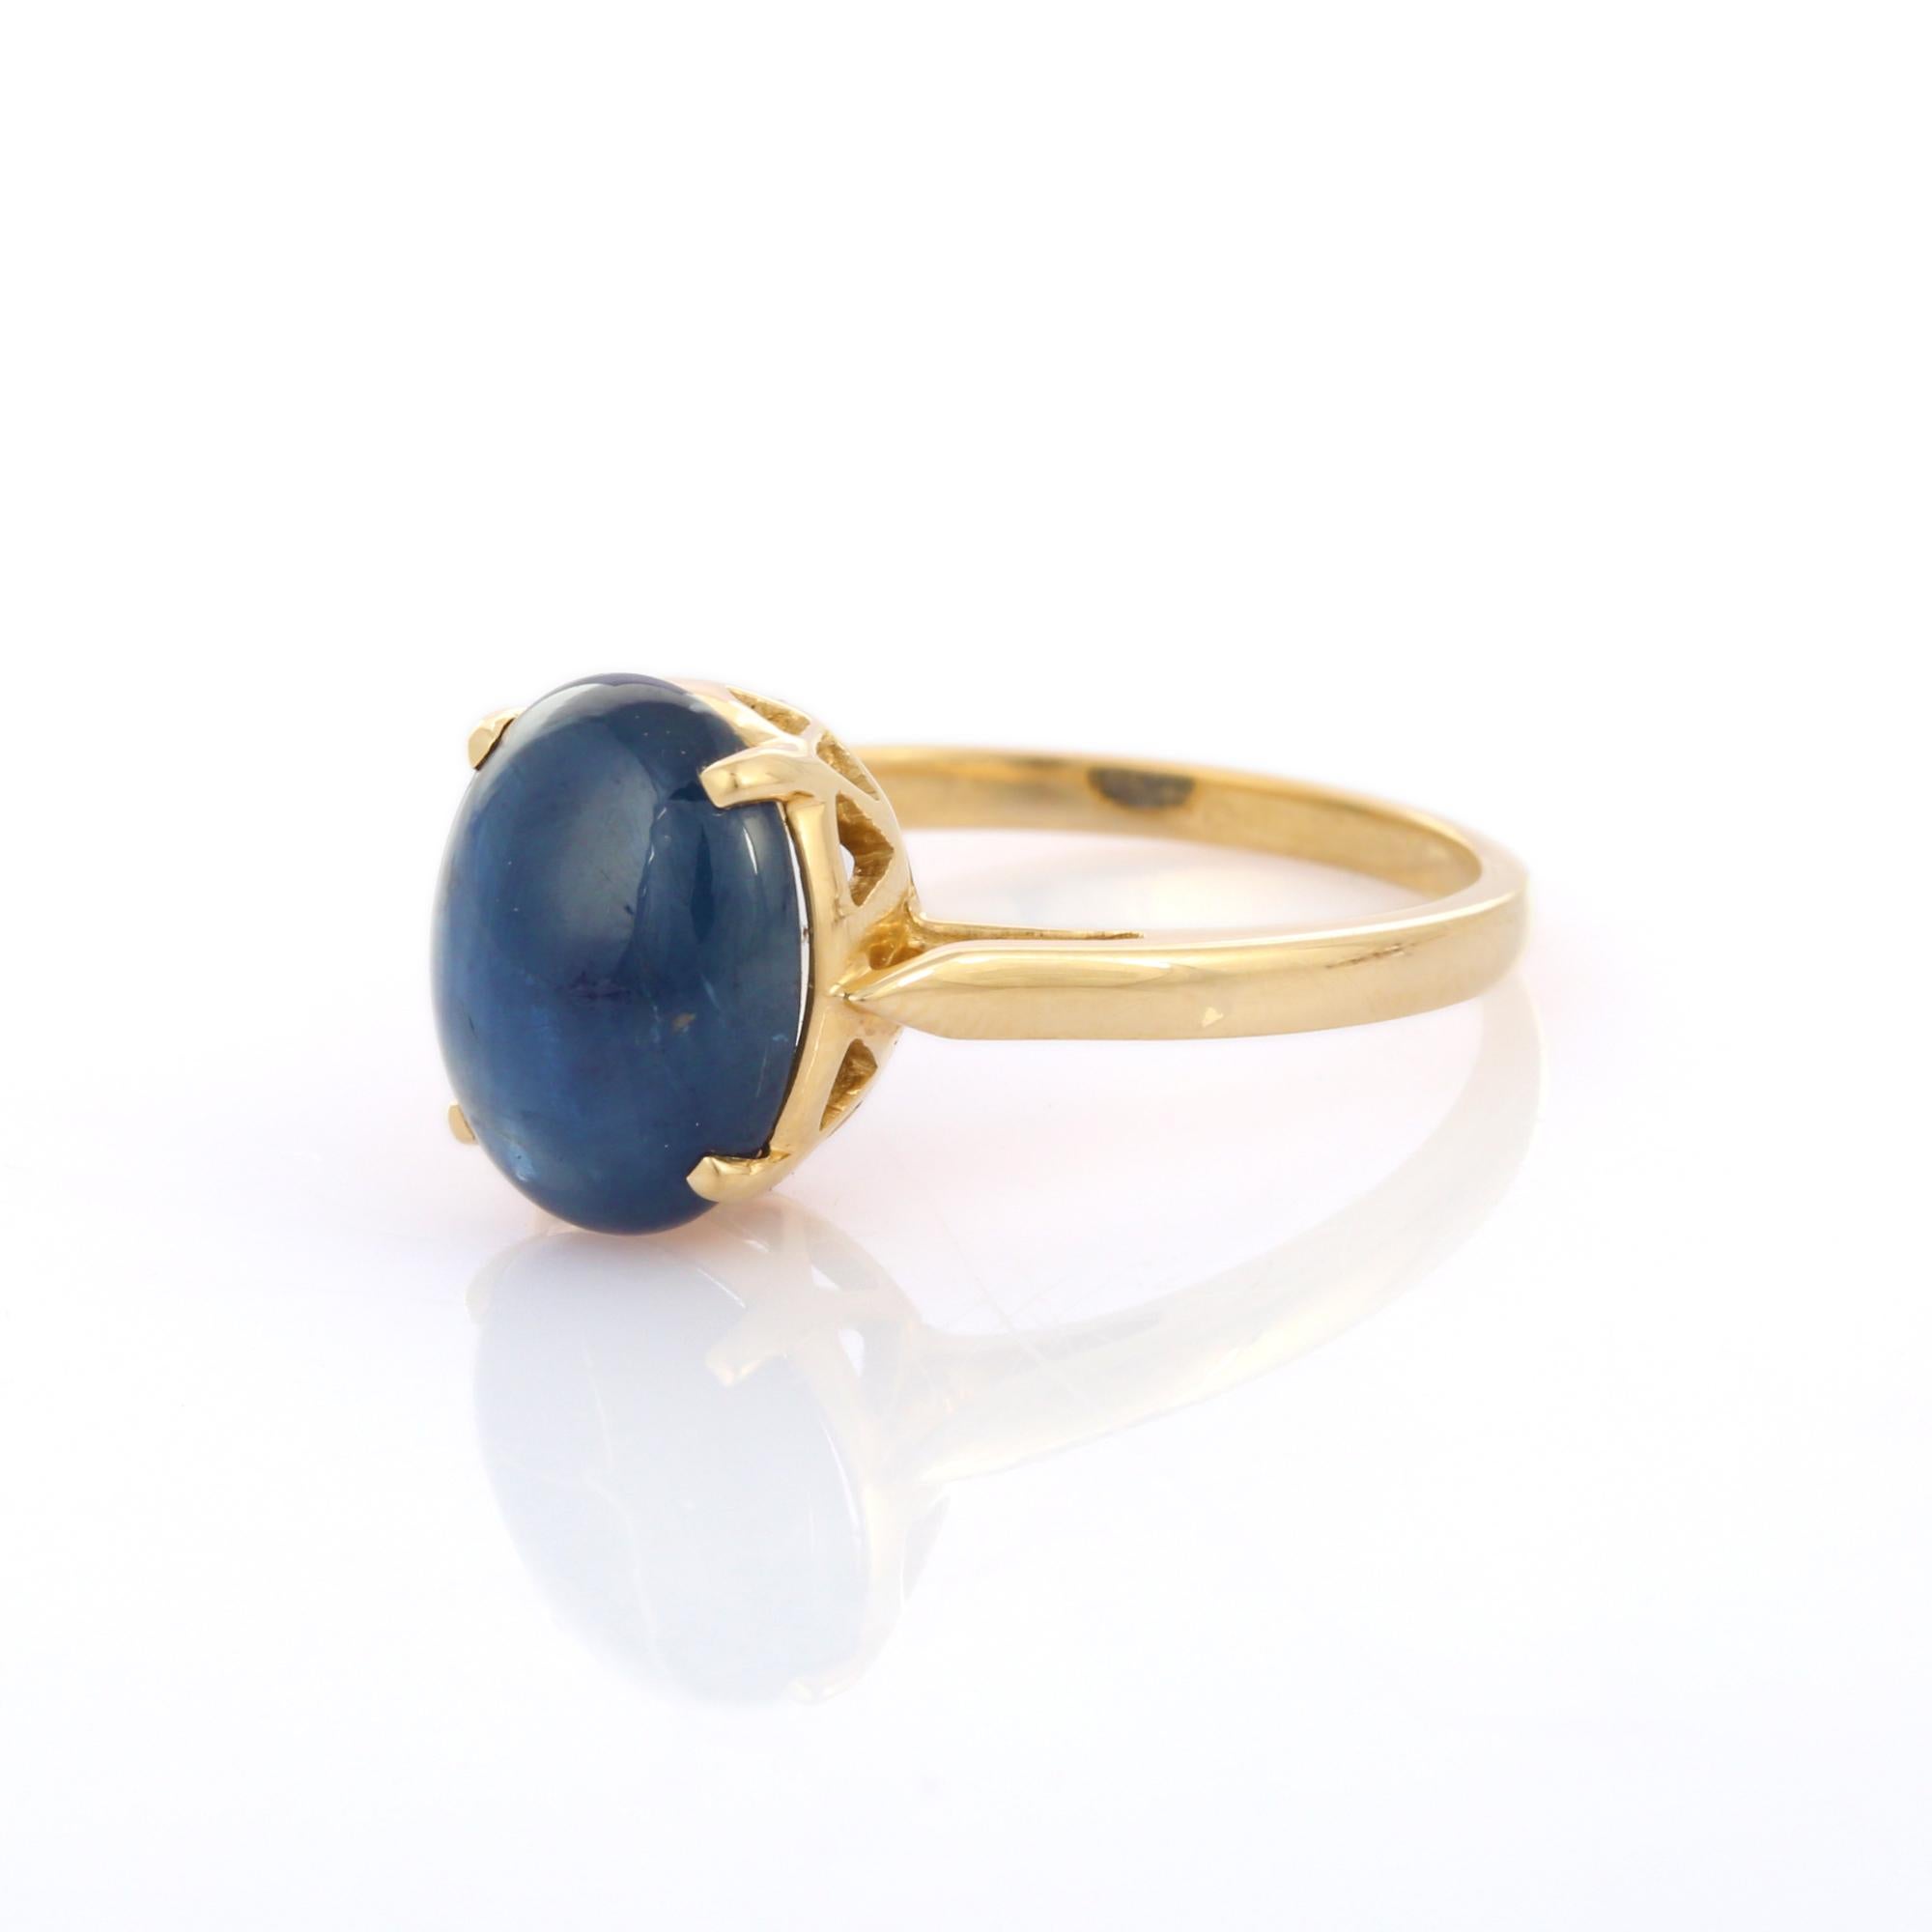 For Sale:  4.33 Carat Blue Sapphire Big Gemstone Ring in 14K Yellow Gold 3